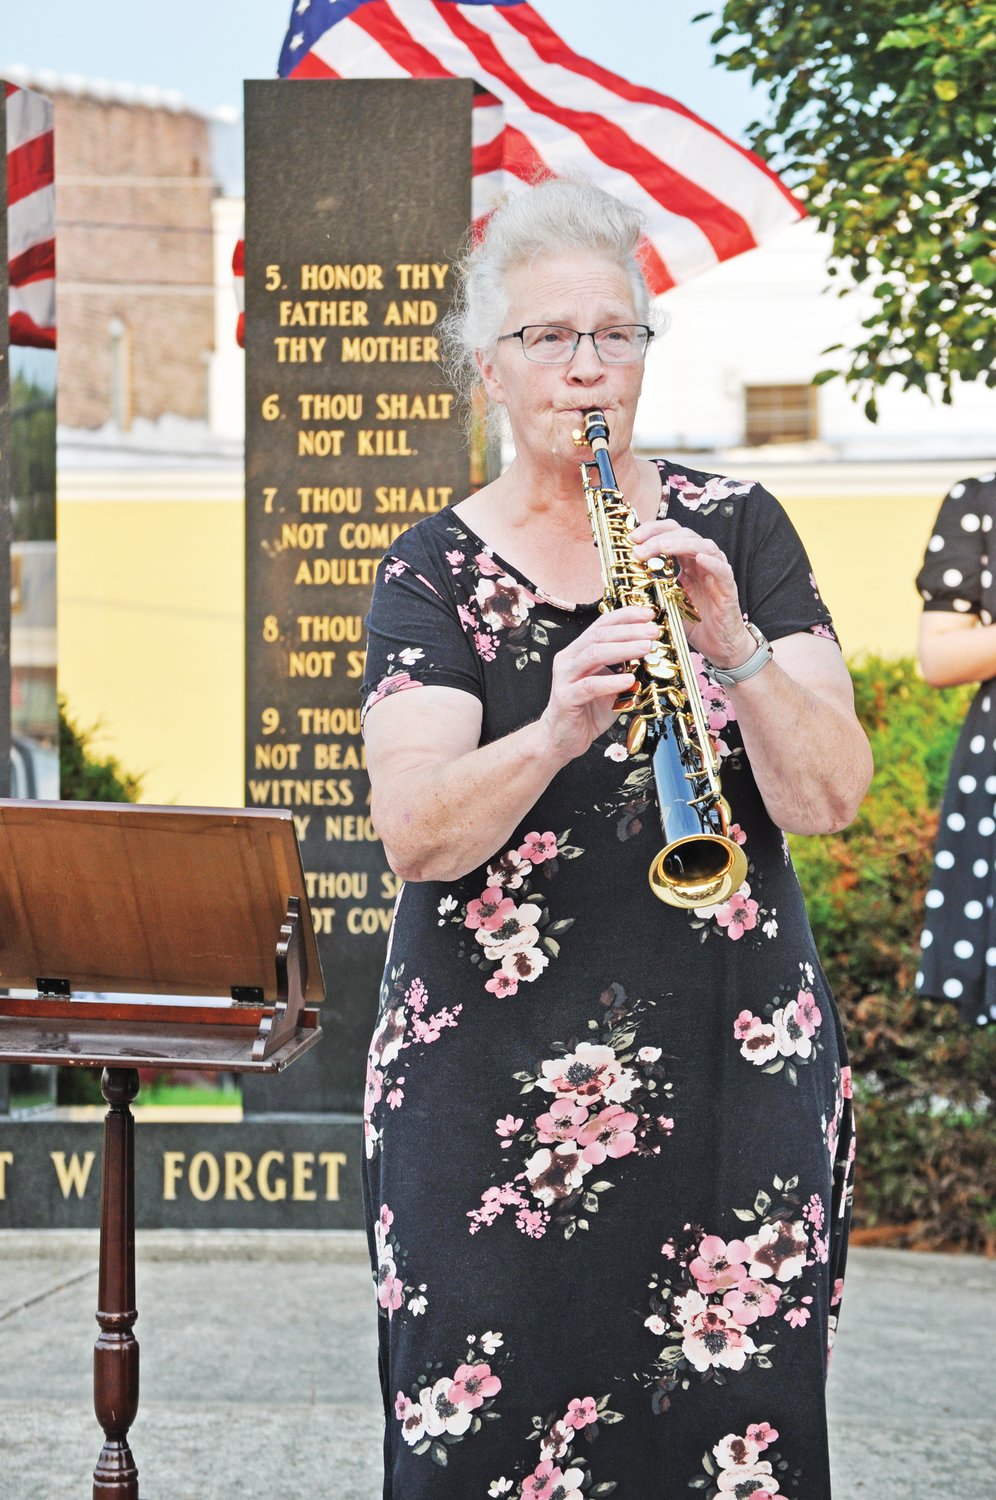 Sharon Sharp plays “God Bless America” at the annual 9/11 memorial ceremony at Pentecostals of Crawfordsville on Saturday.